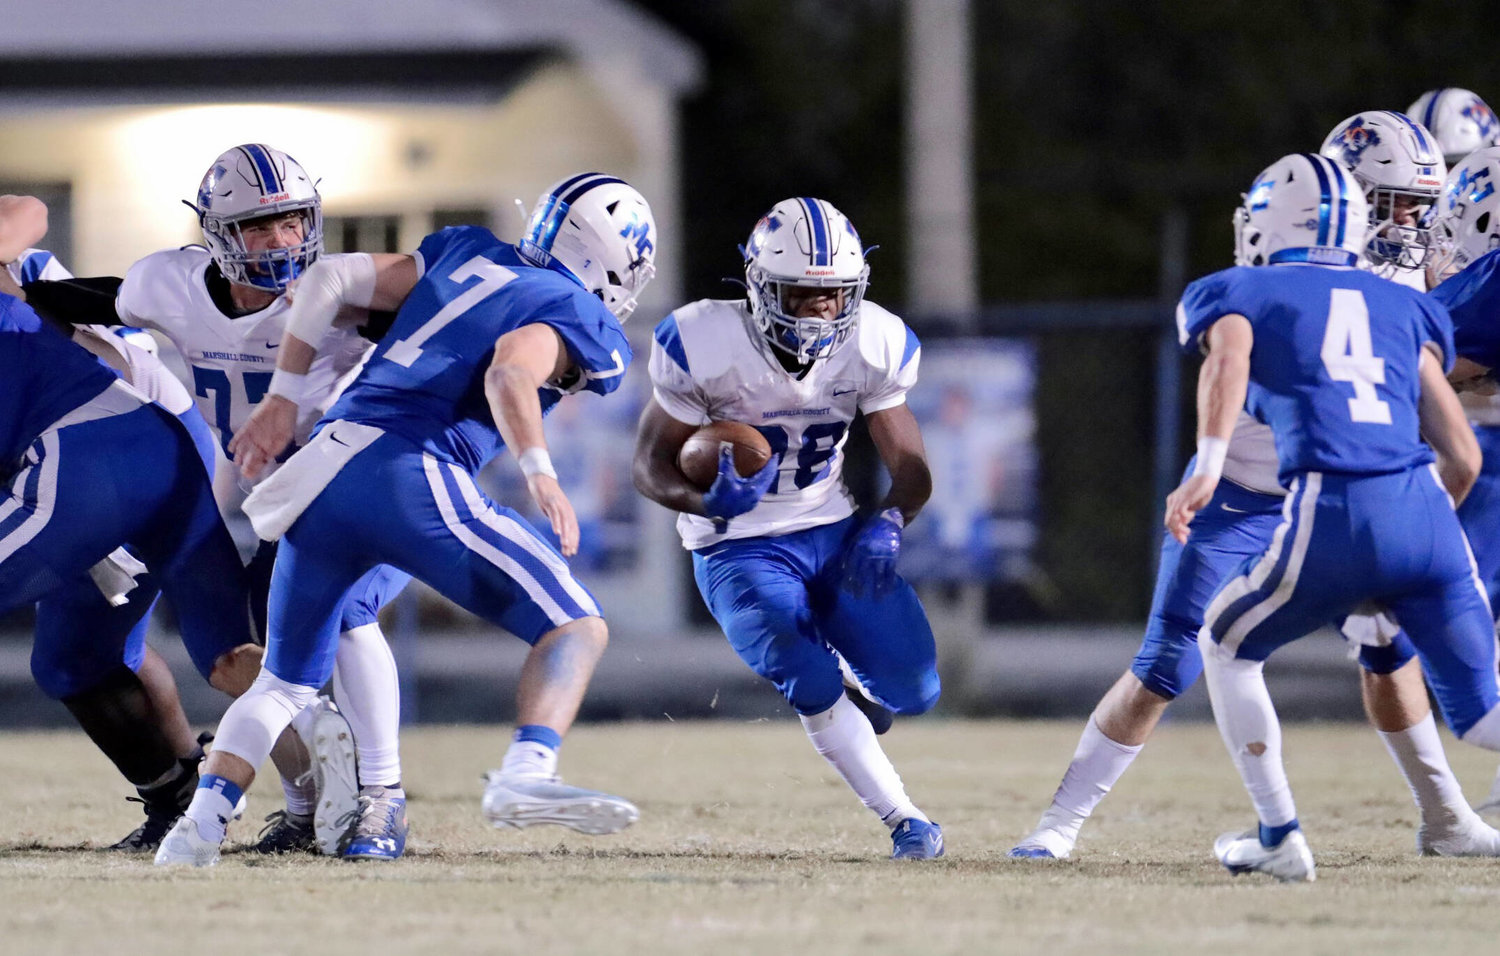 Tiger sophomore running back Demari Braden (29) led MCHS in rushing with 94 yards on 24 carries.